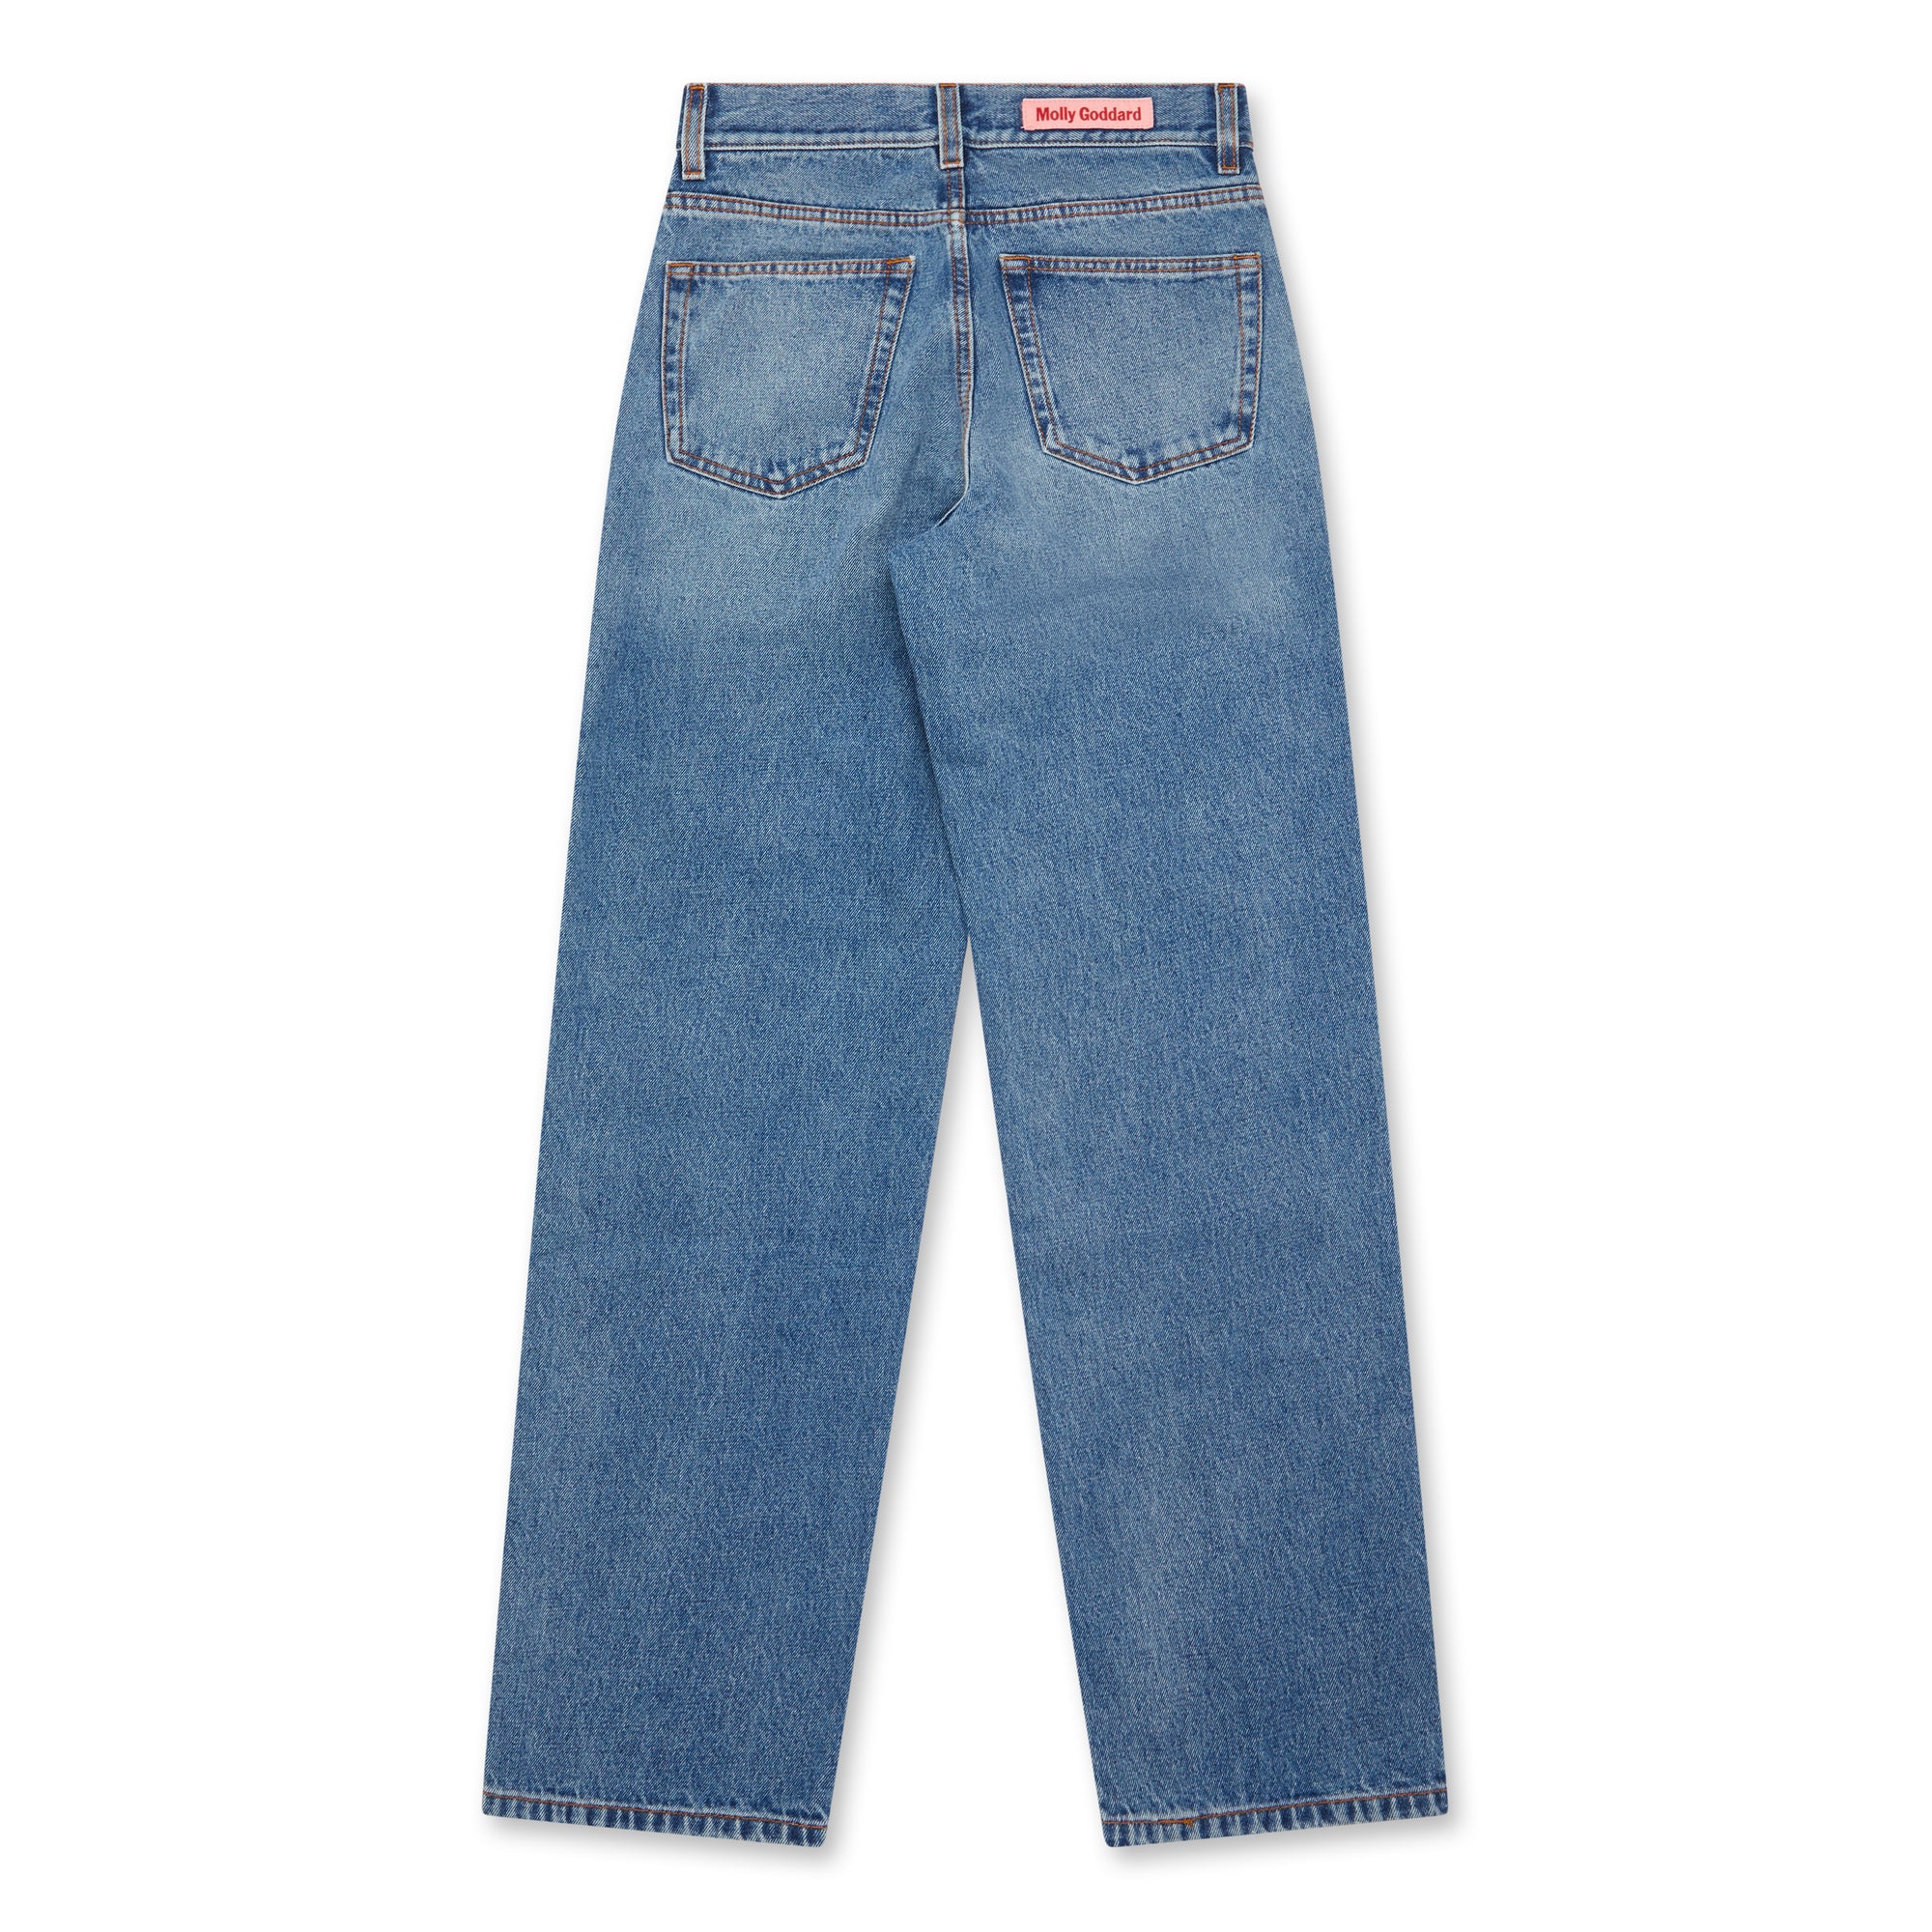 Molly Goddard - Women’s Lily Jeans - (Blue Wash) view 2